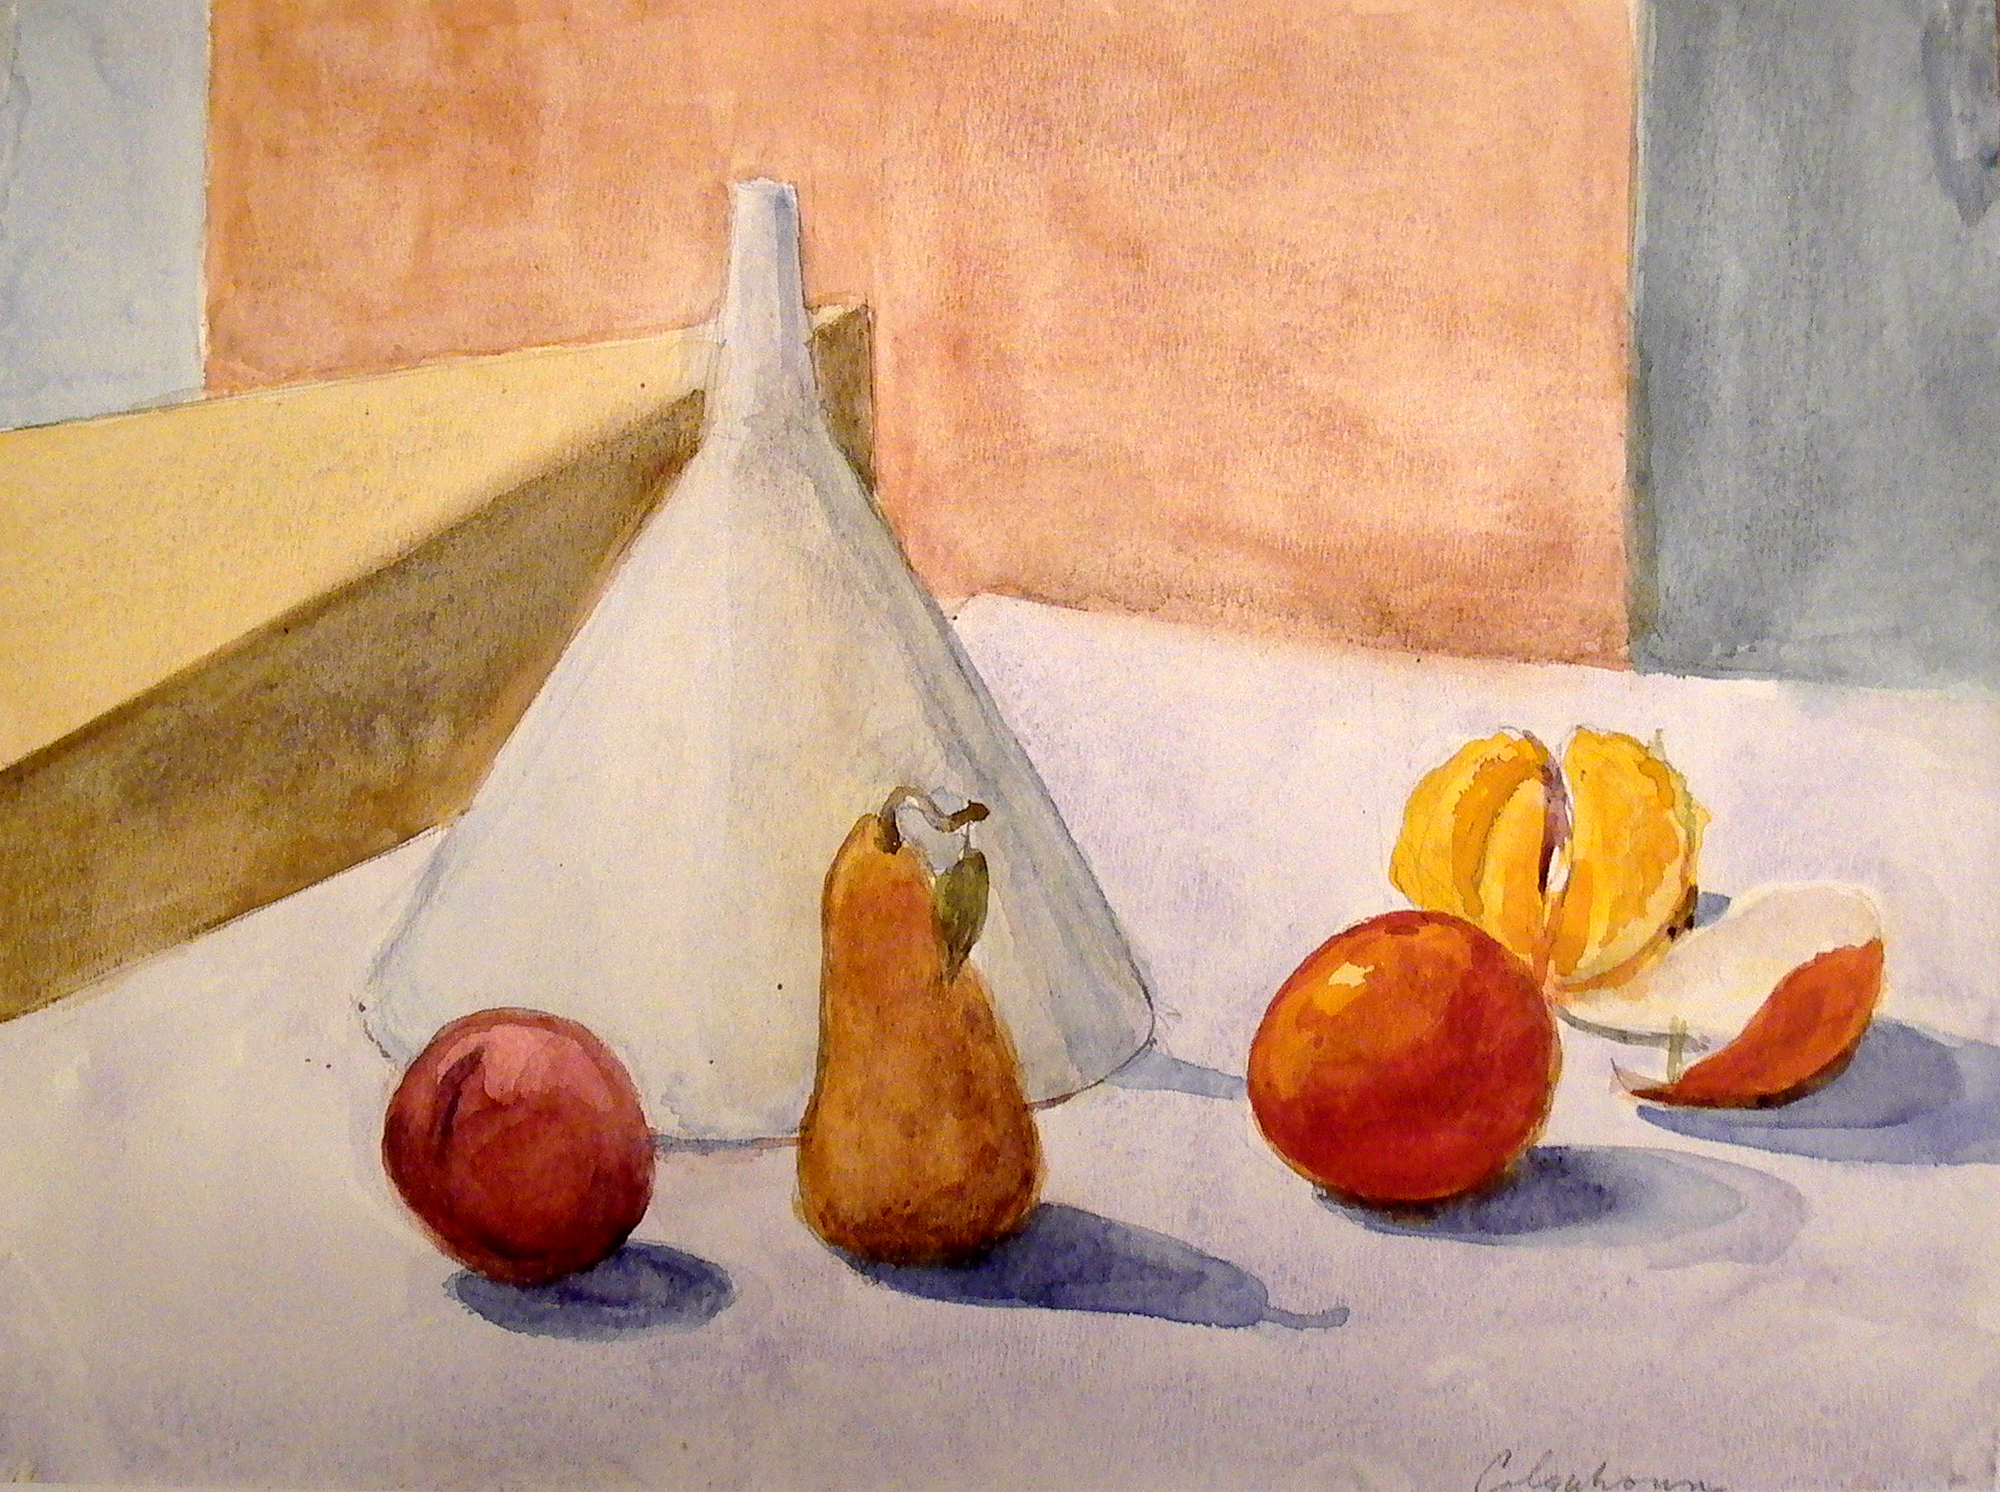 Plum, Pear, Oranges and Funnel, 9.5" x 12.5", watercolor, 1989.